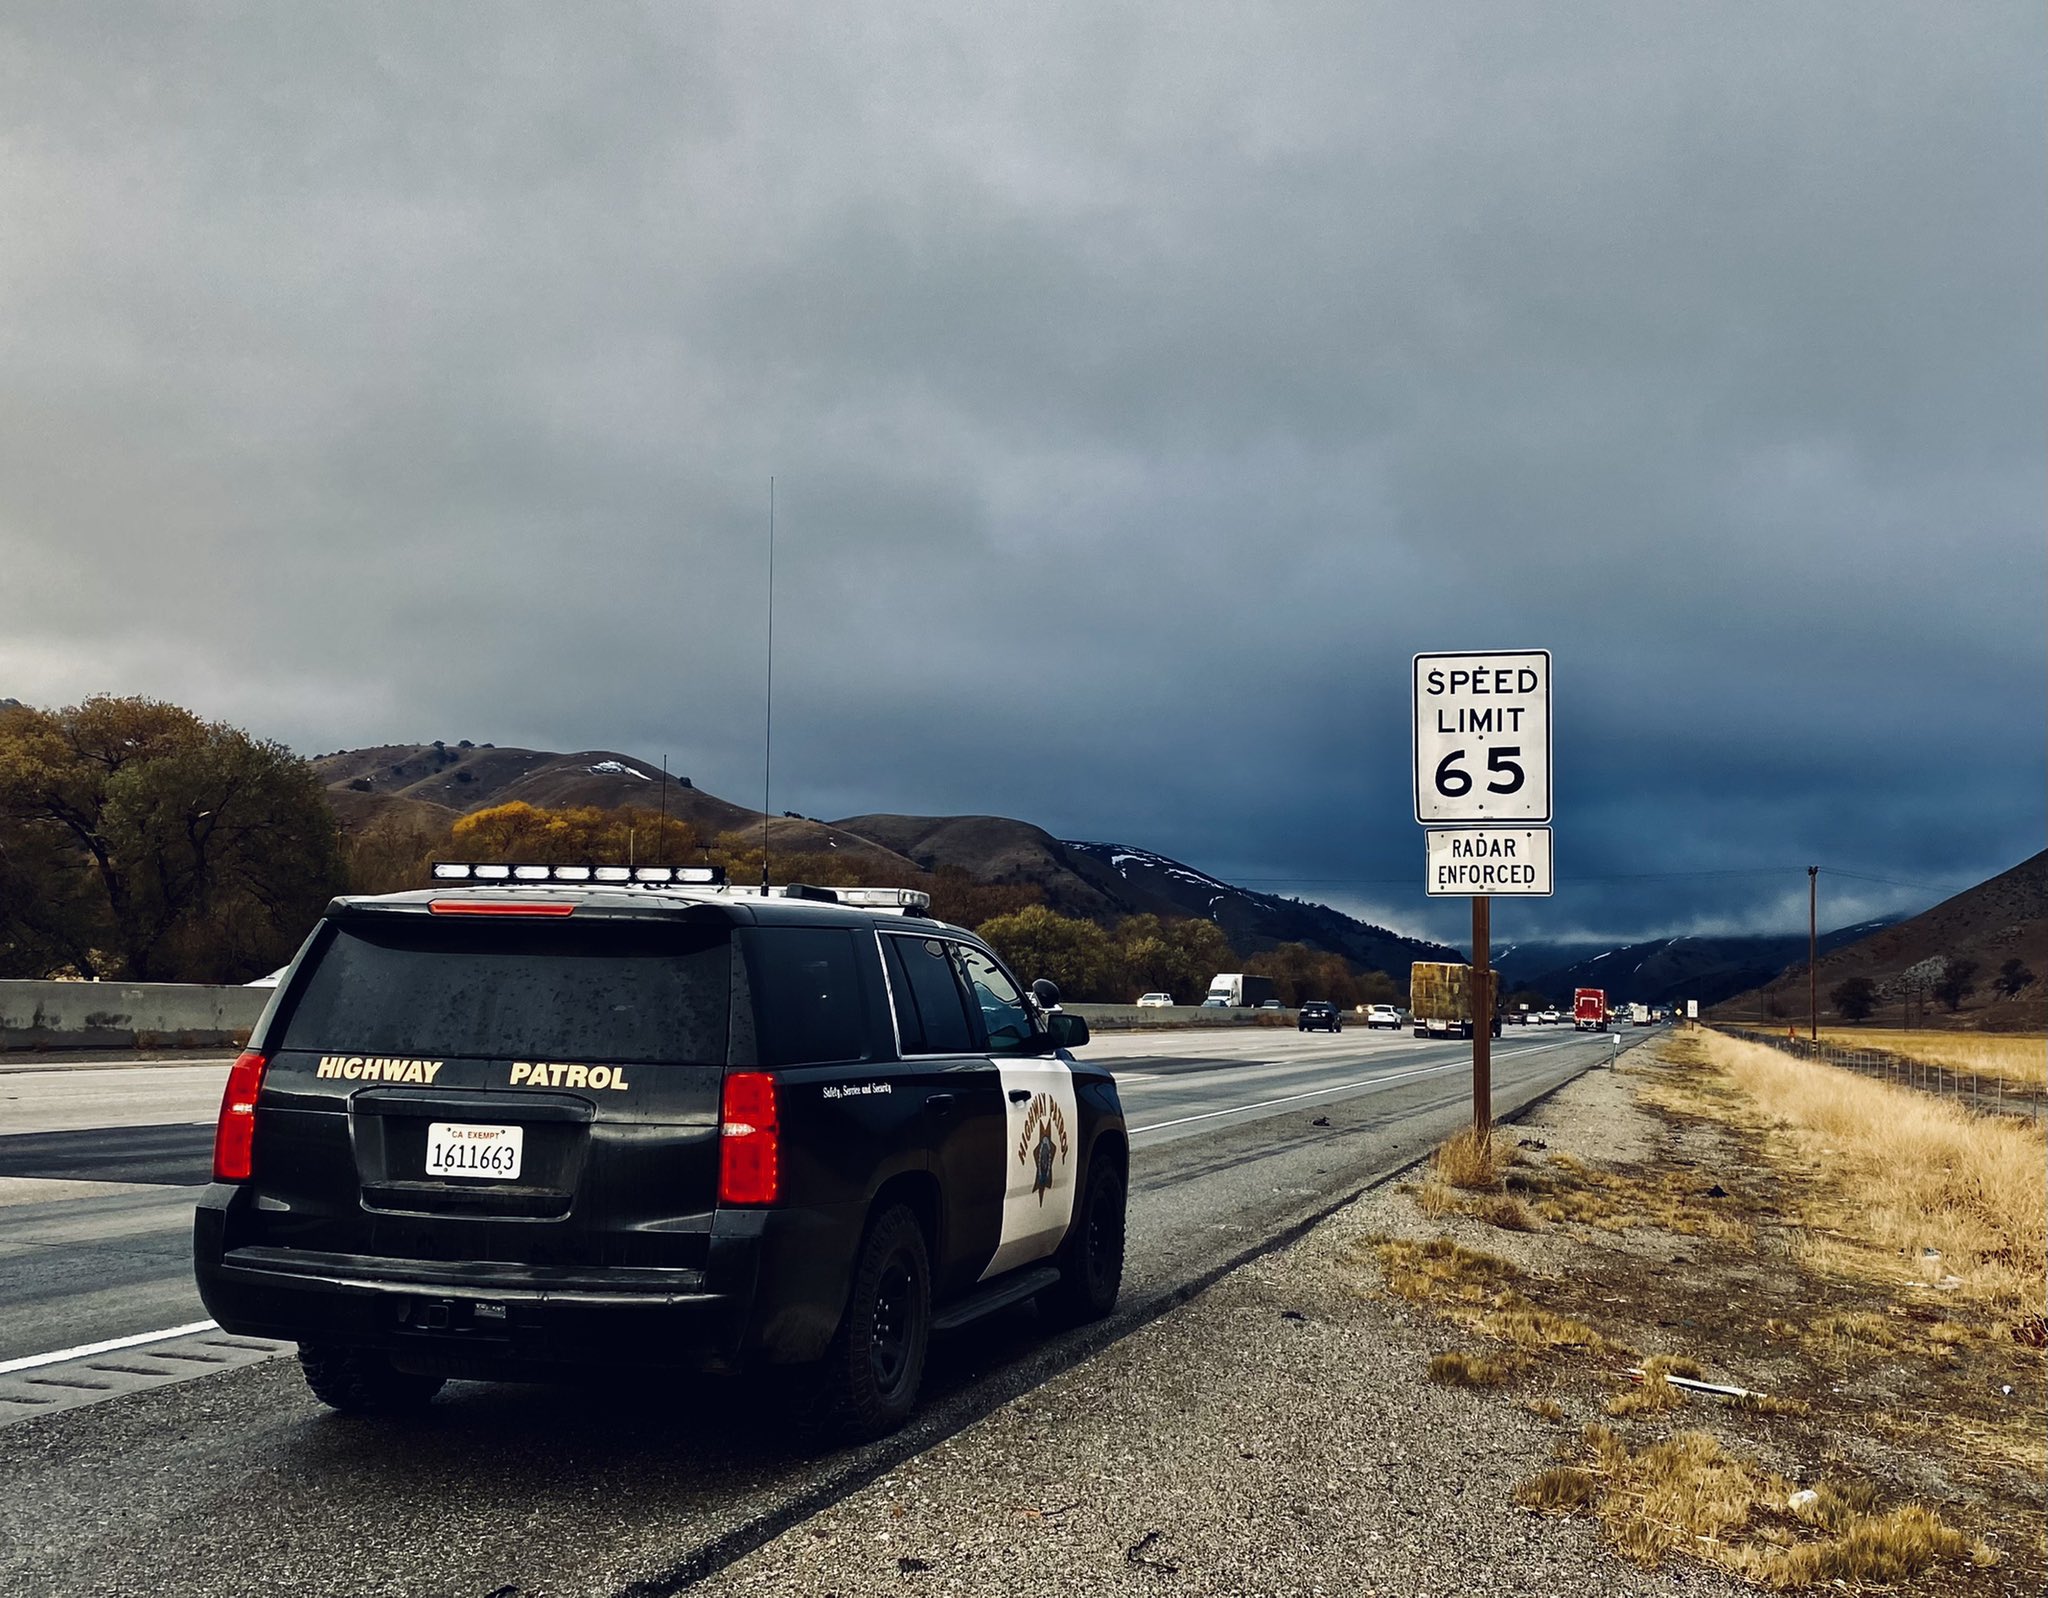 CHP Fort Tejon we are expecting a storm with the possibility of snow on the Grapevine over the next couple of days. To ensure you travel safely up and